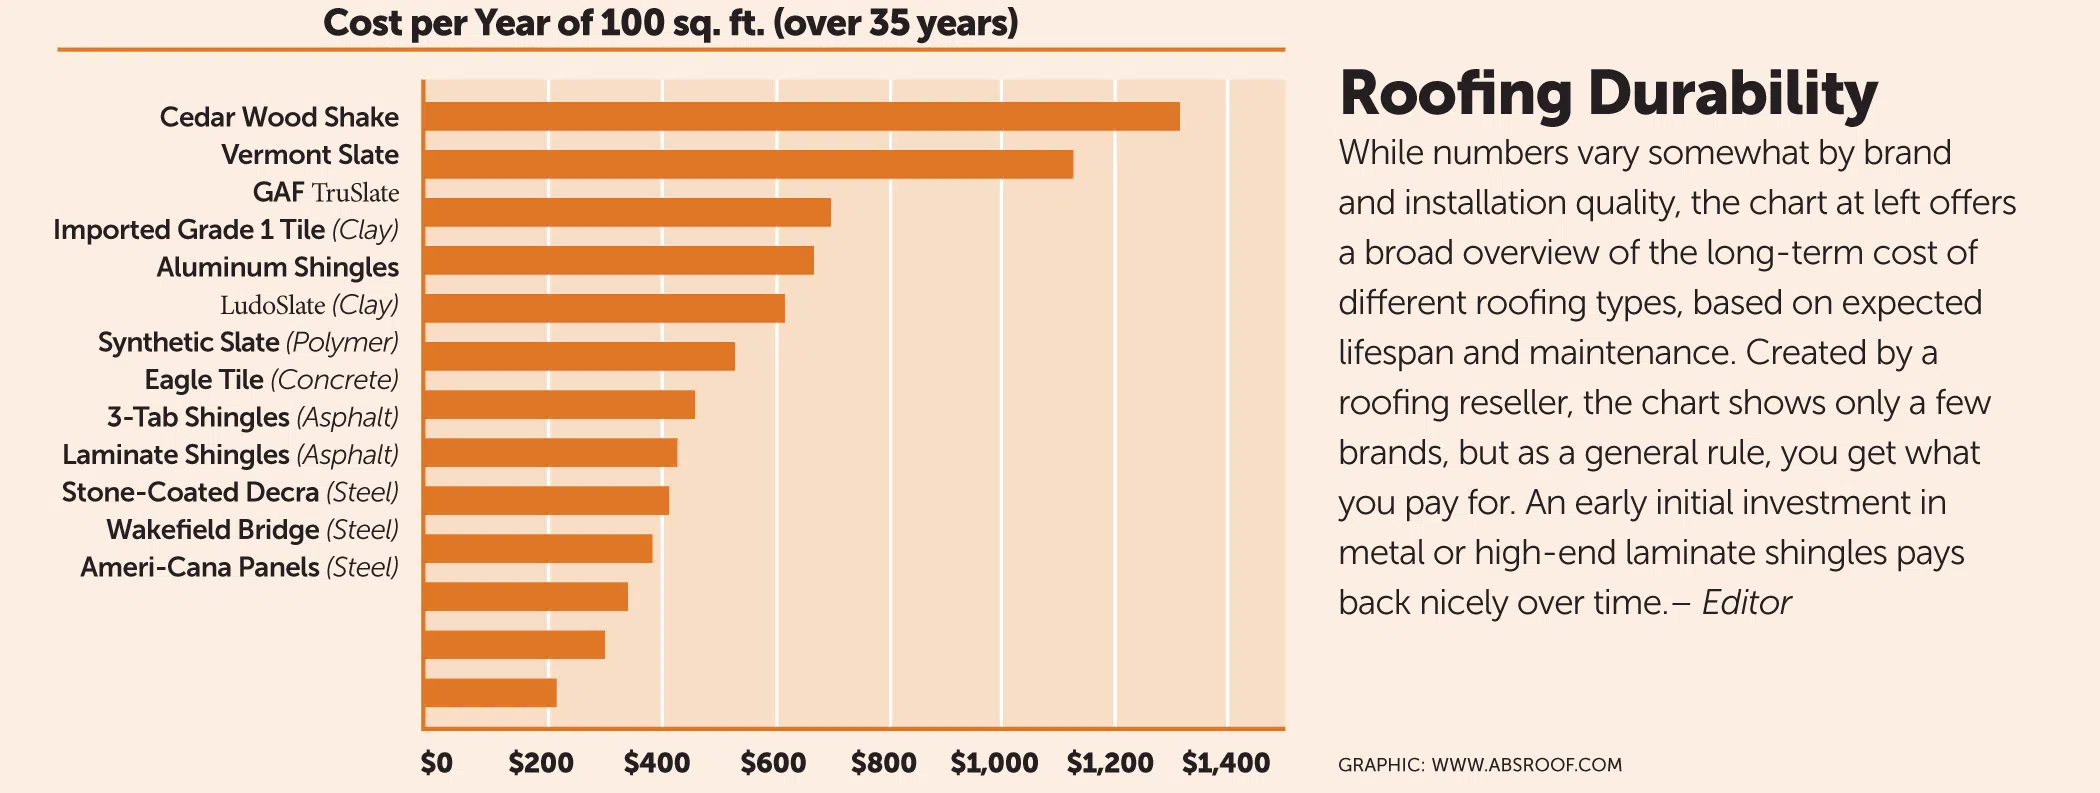 roofing durability